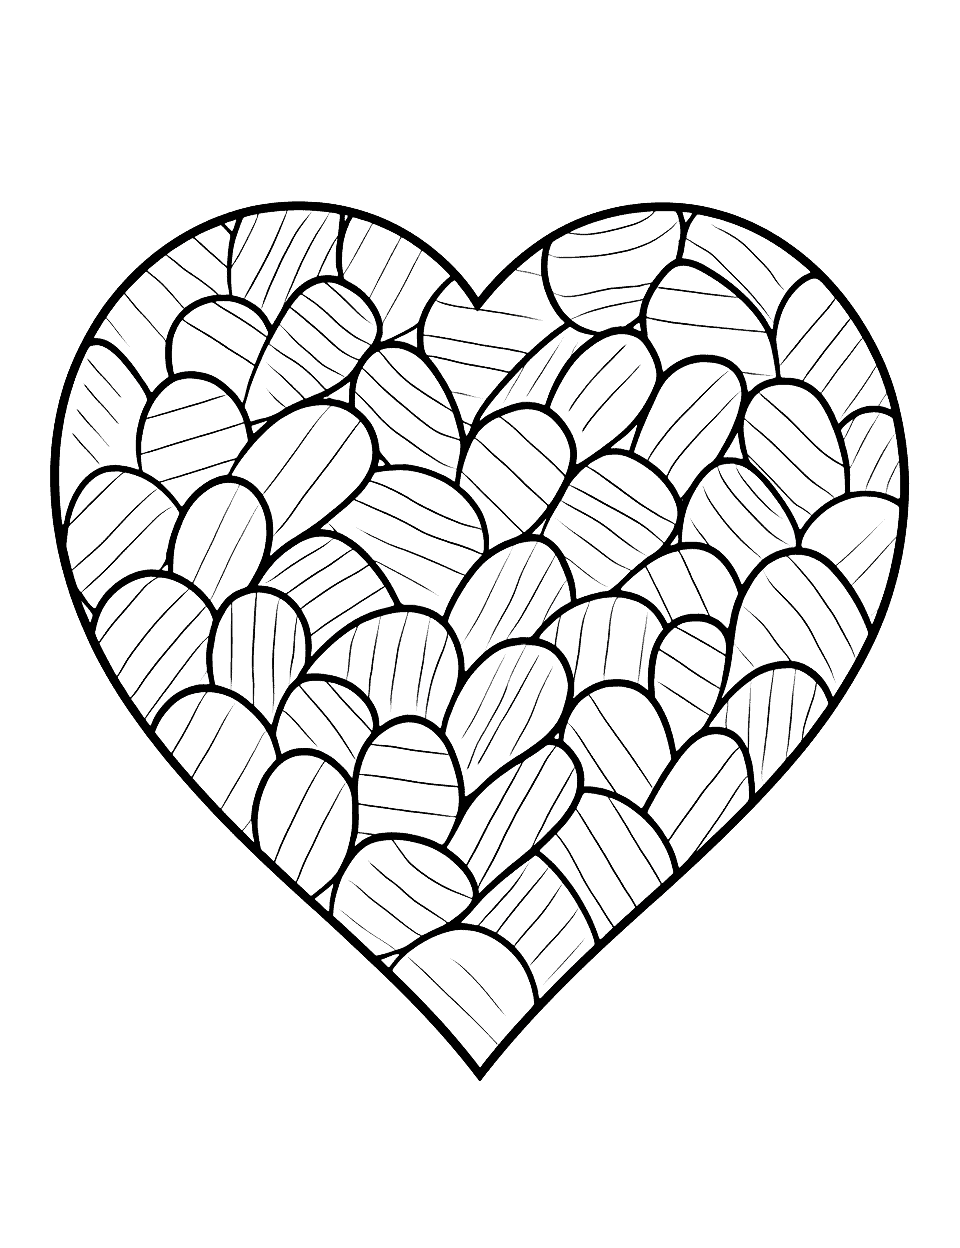 Heart of Gold Coloring Page - A heart-shaped gold nugget that children can color in golden hues.